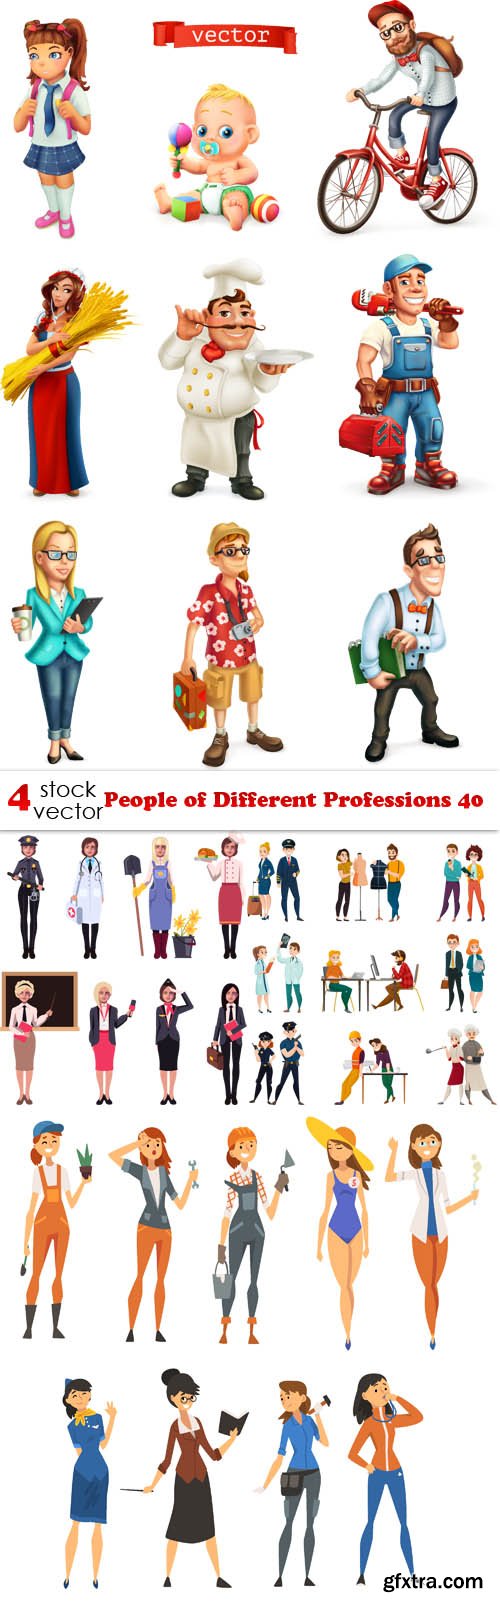 Vectors - People of Different Professions 40